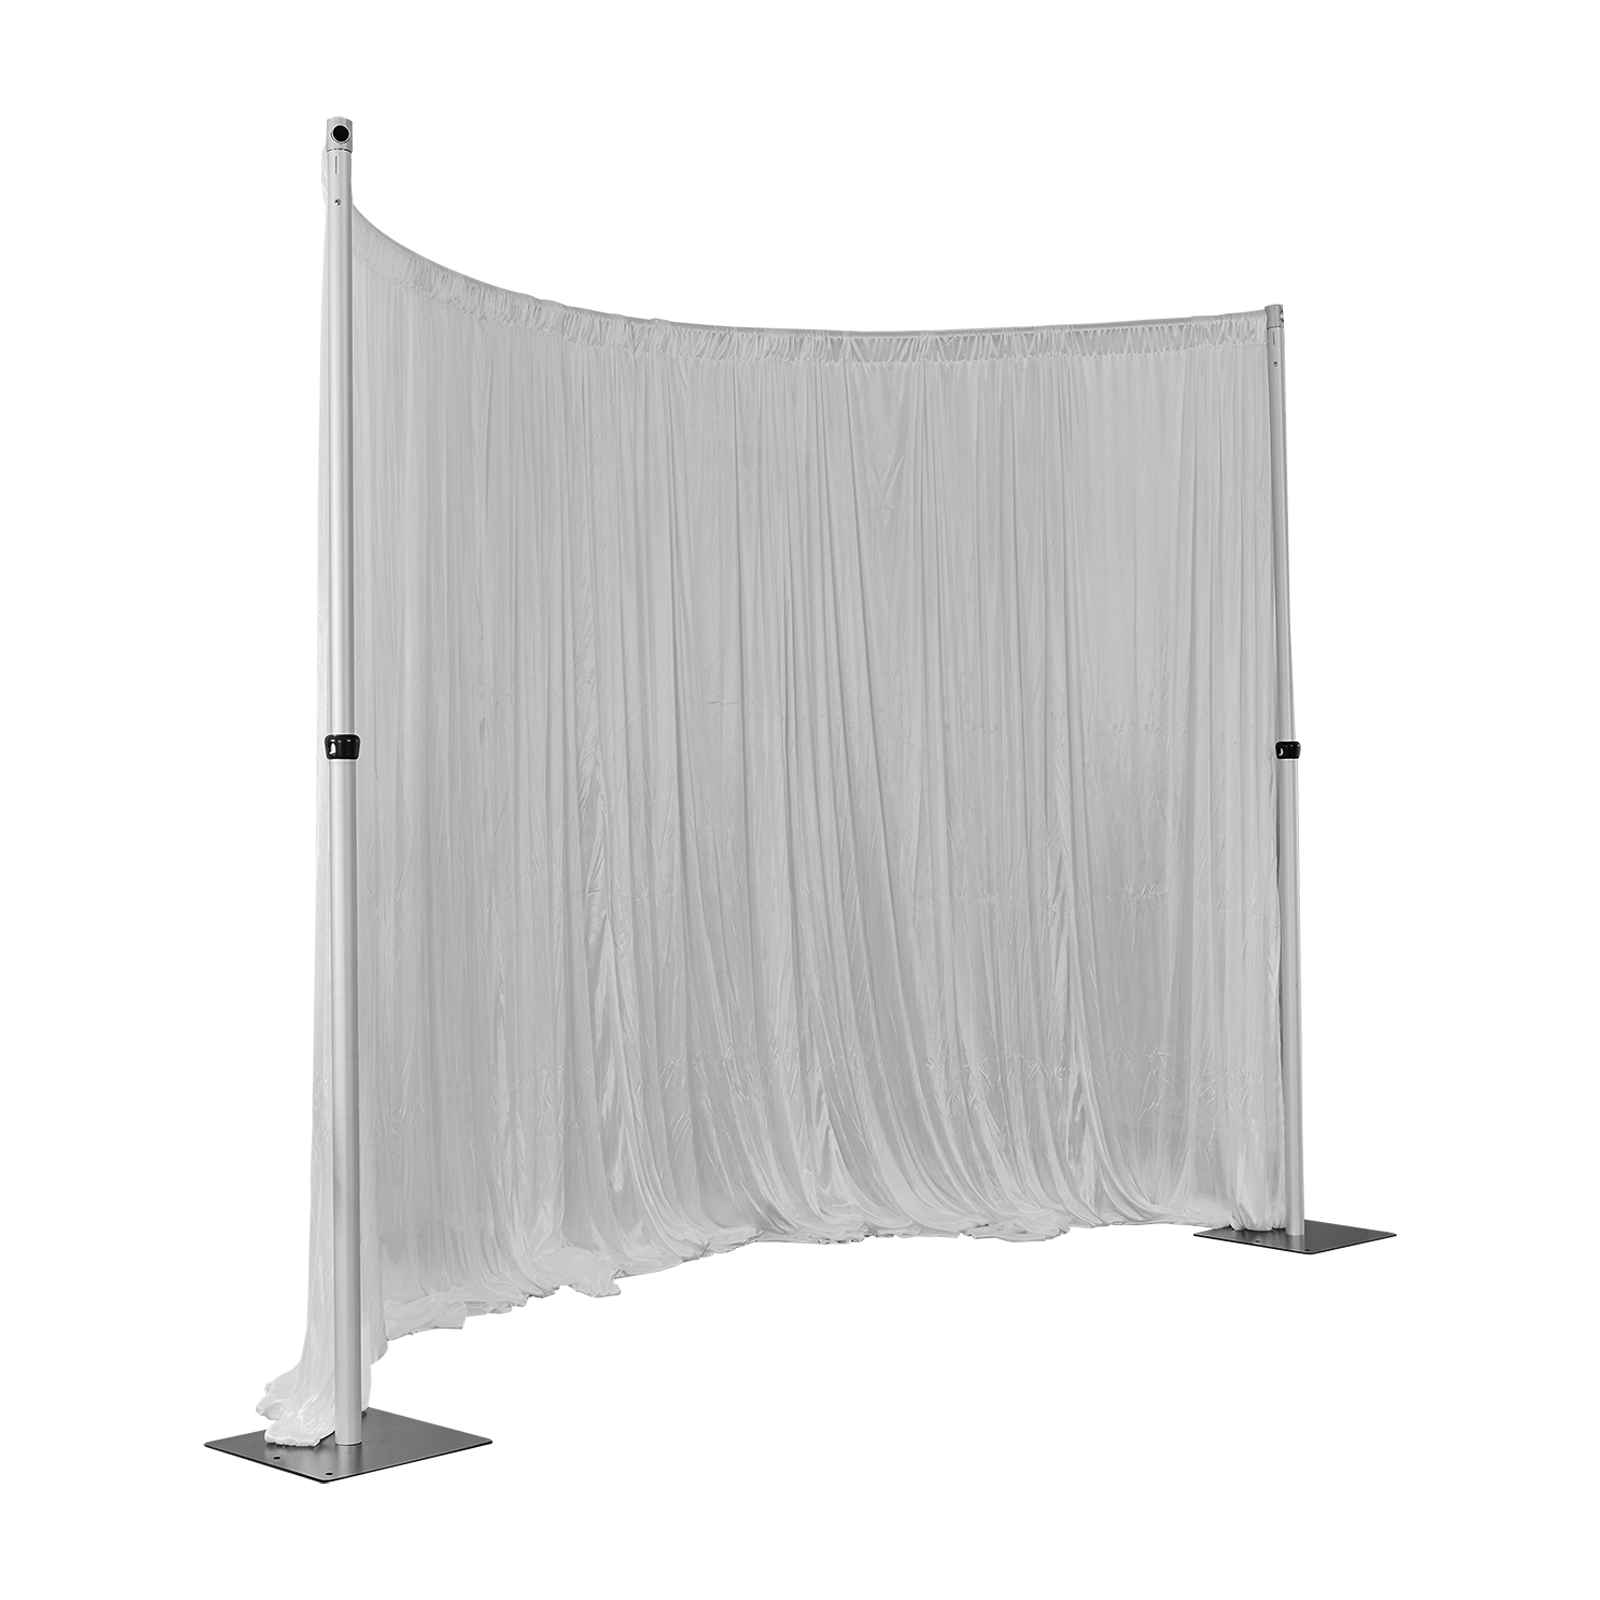 Hecis 6-10' Tall x 6-10' Wide Backdrop Stand Adjustable for Wedding De